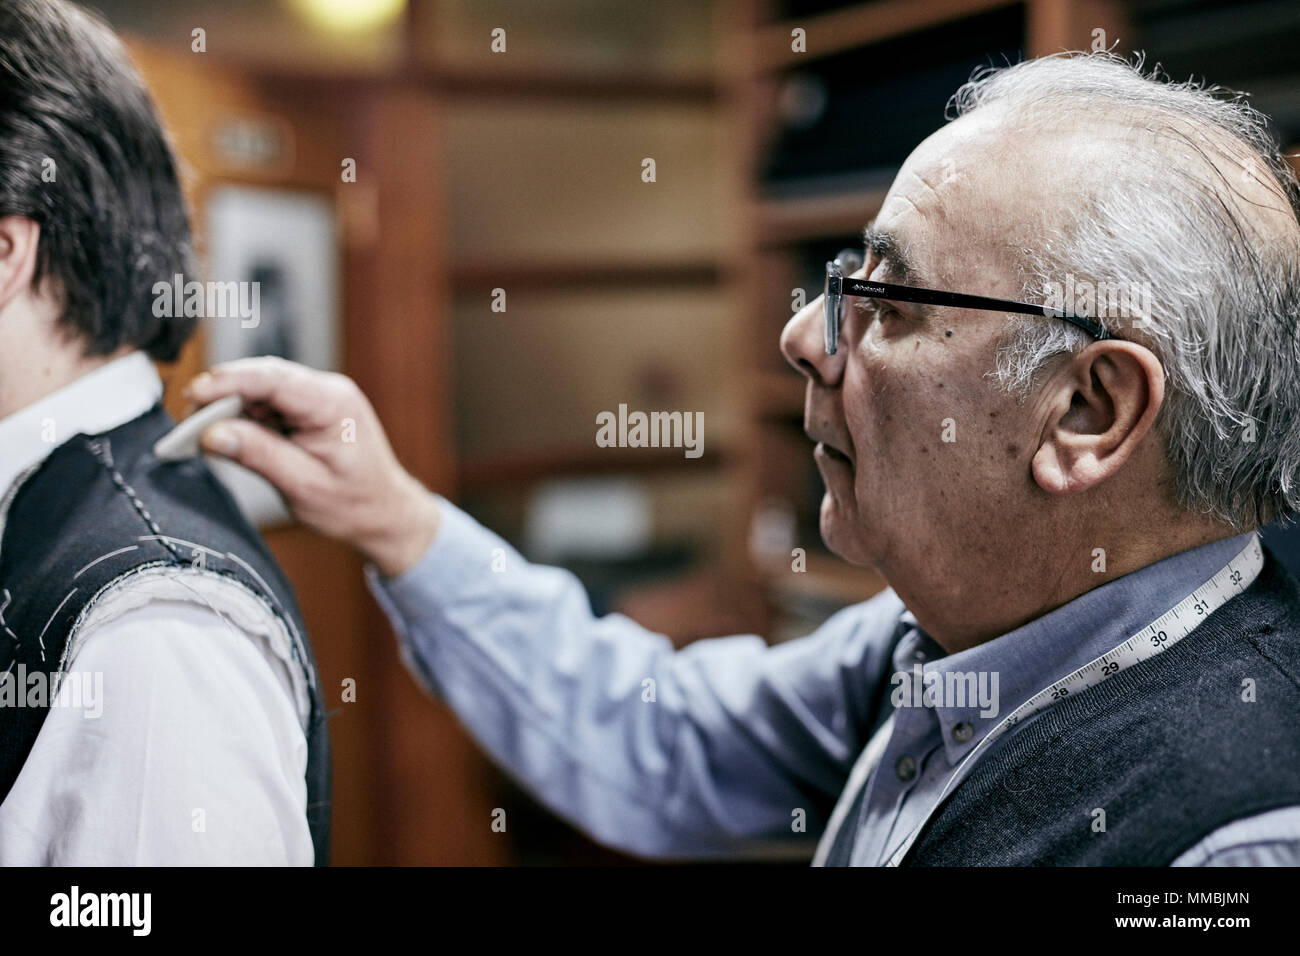 Tailor fitting a jacket on a customer using tailor's chalk to mark the fabric  mature man grey hair glasses client bespoke tailoring Stock Photo